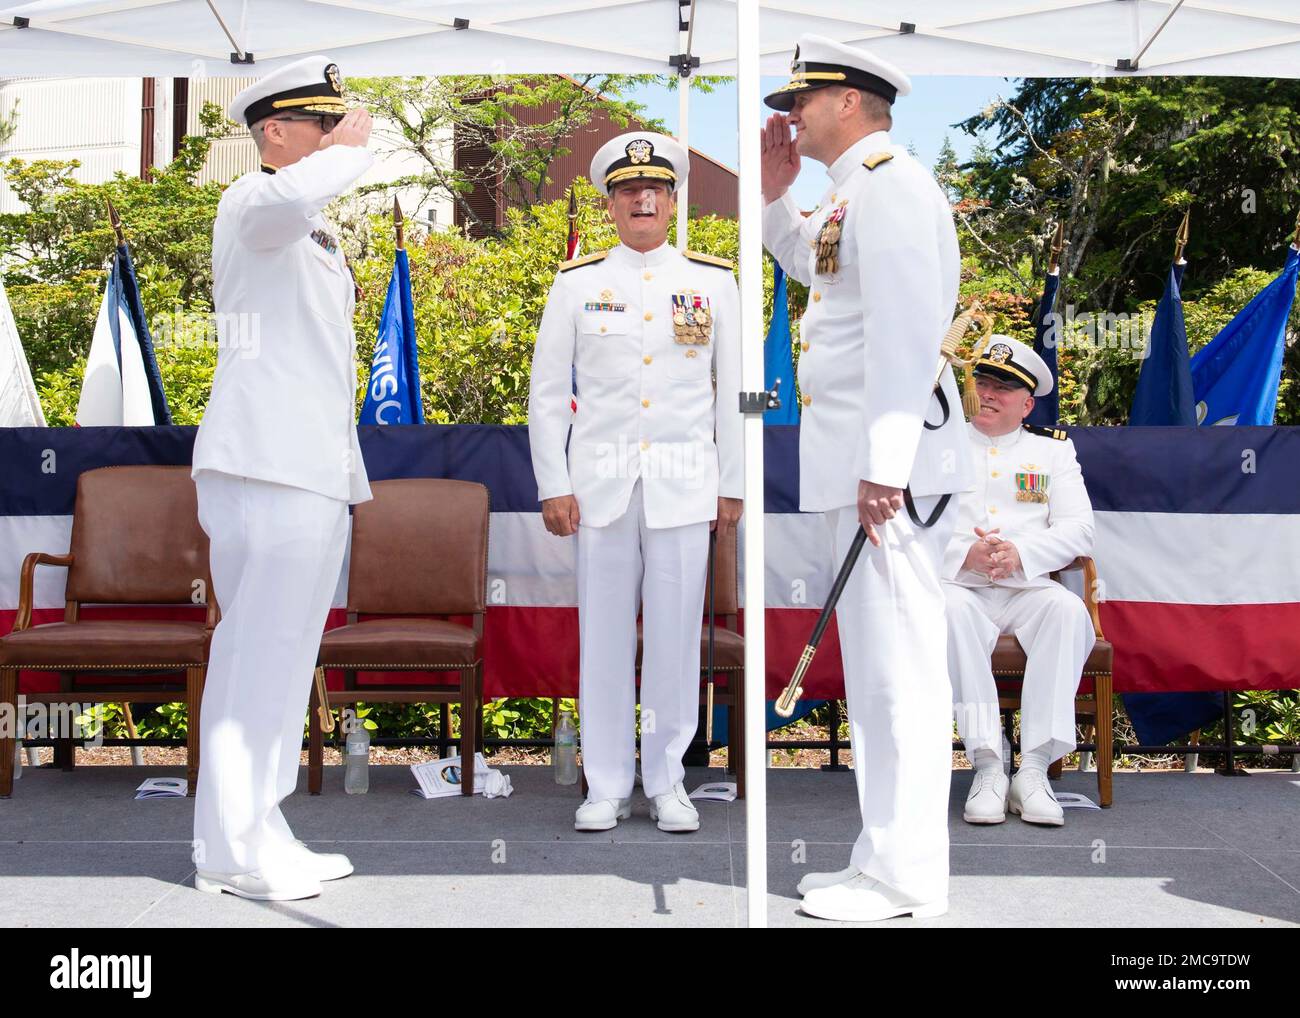 220628-N-ED185-1104    NAVAL BASE KITSAP – BANGOR, Wash. (June 28, 2022) Rear Adm. Robert Gaucher and Rear Adm. Mark Behning salute during a change of command ceremony onboard Naval Base Kitsap – Bangor, Wash., June 28, 2022. Behning relieved Gaucher as the 25th commander of Submarine Group 9. Stock Photo